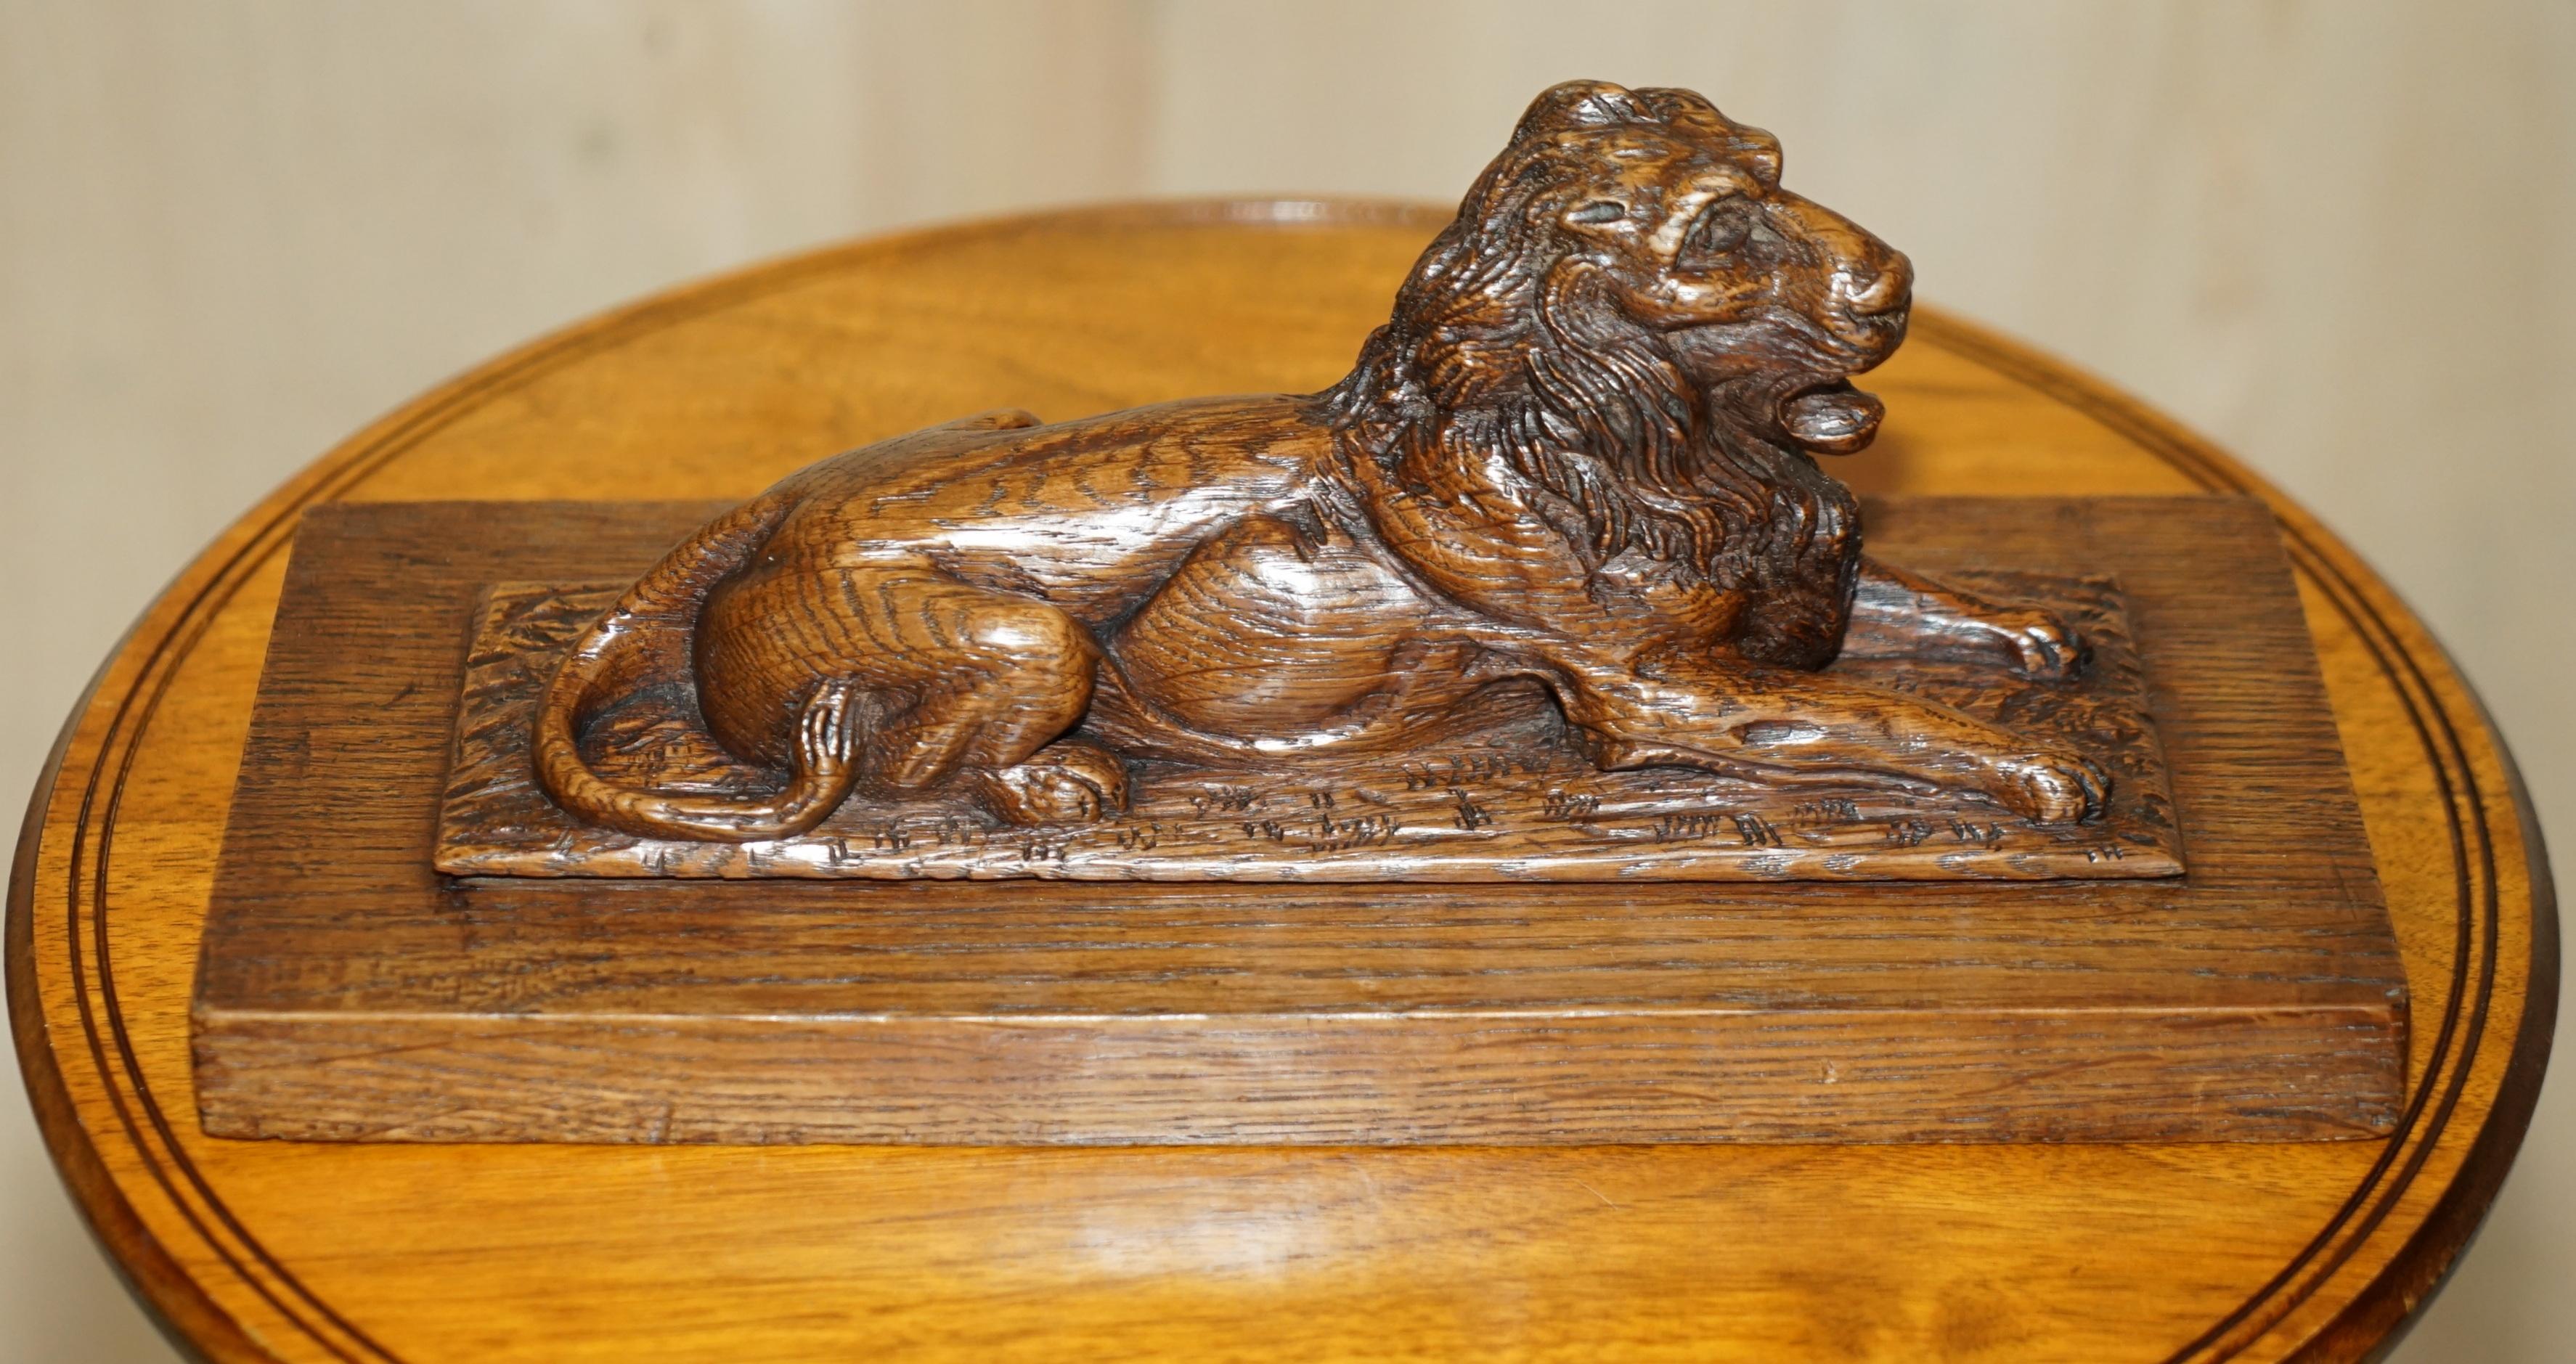 High Victorian Stunning Antique circa 1860 Hand Carved English Oak Recumbent Lion Statue For Sale